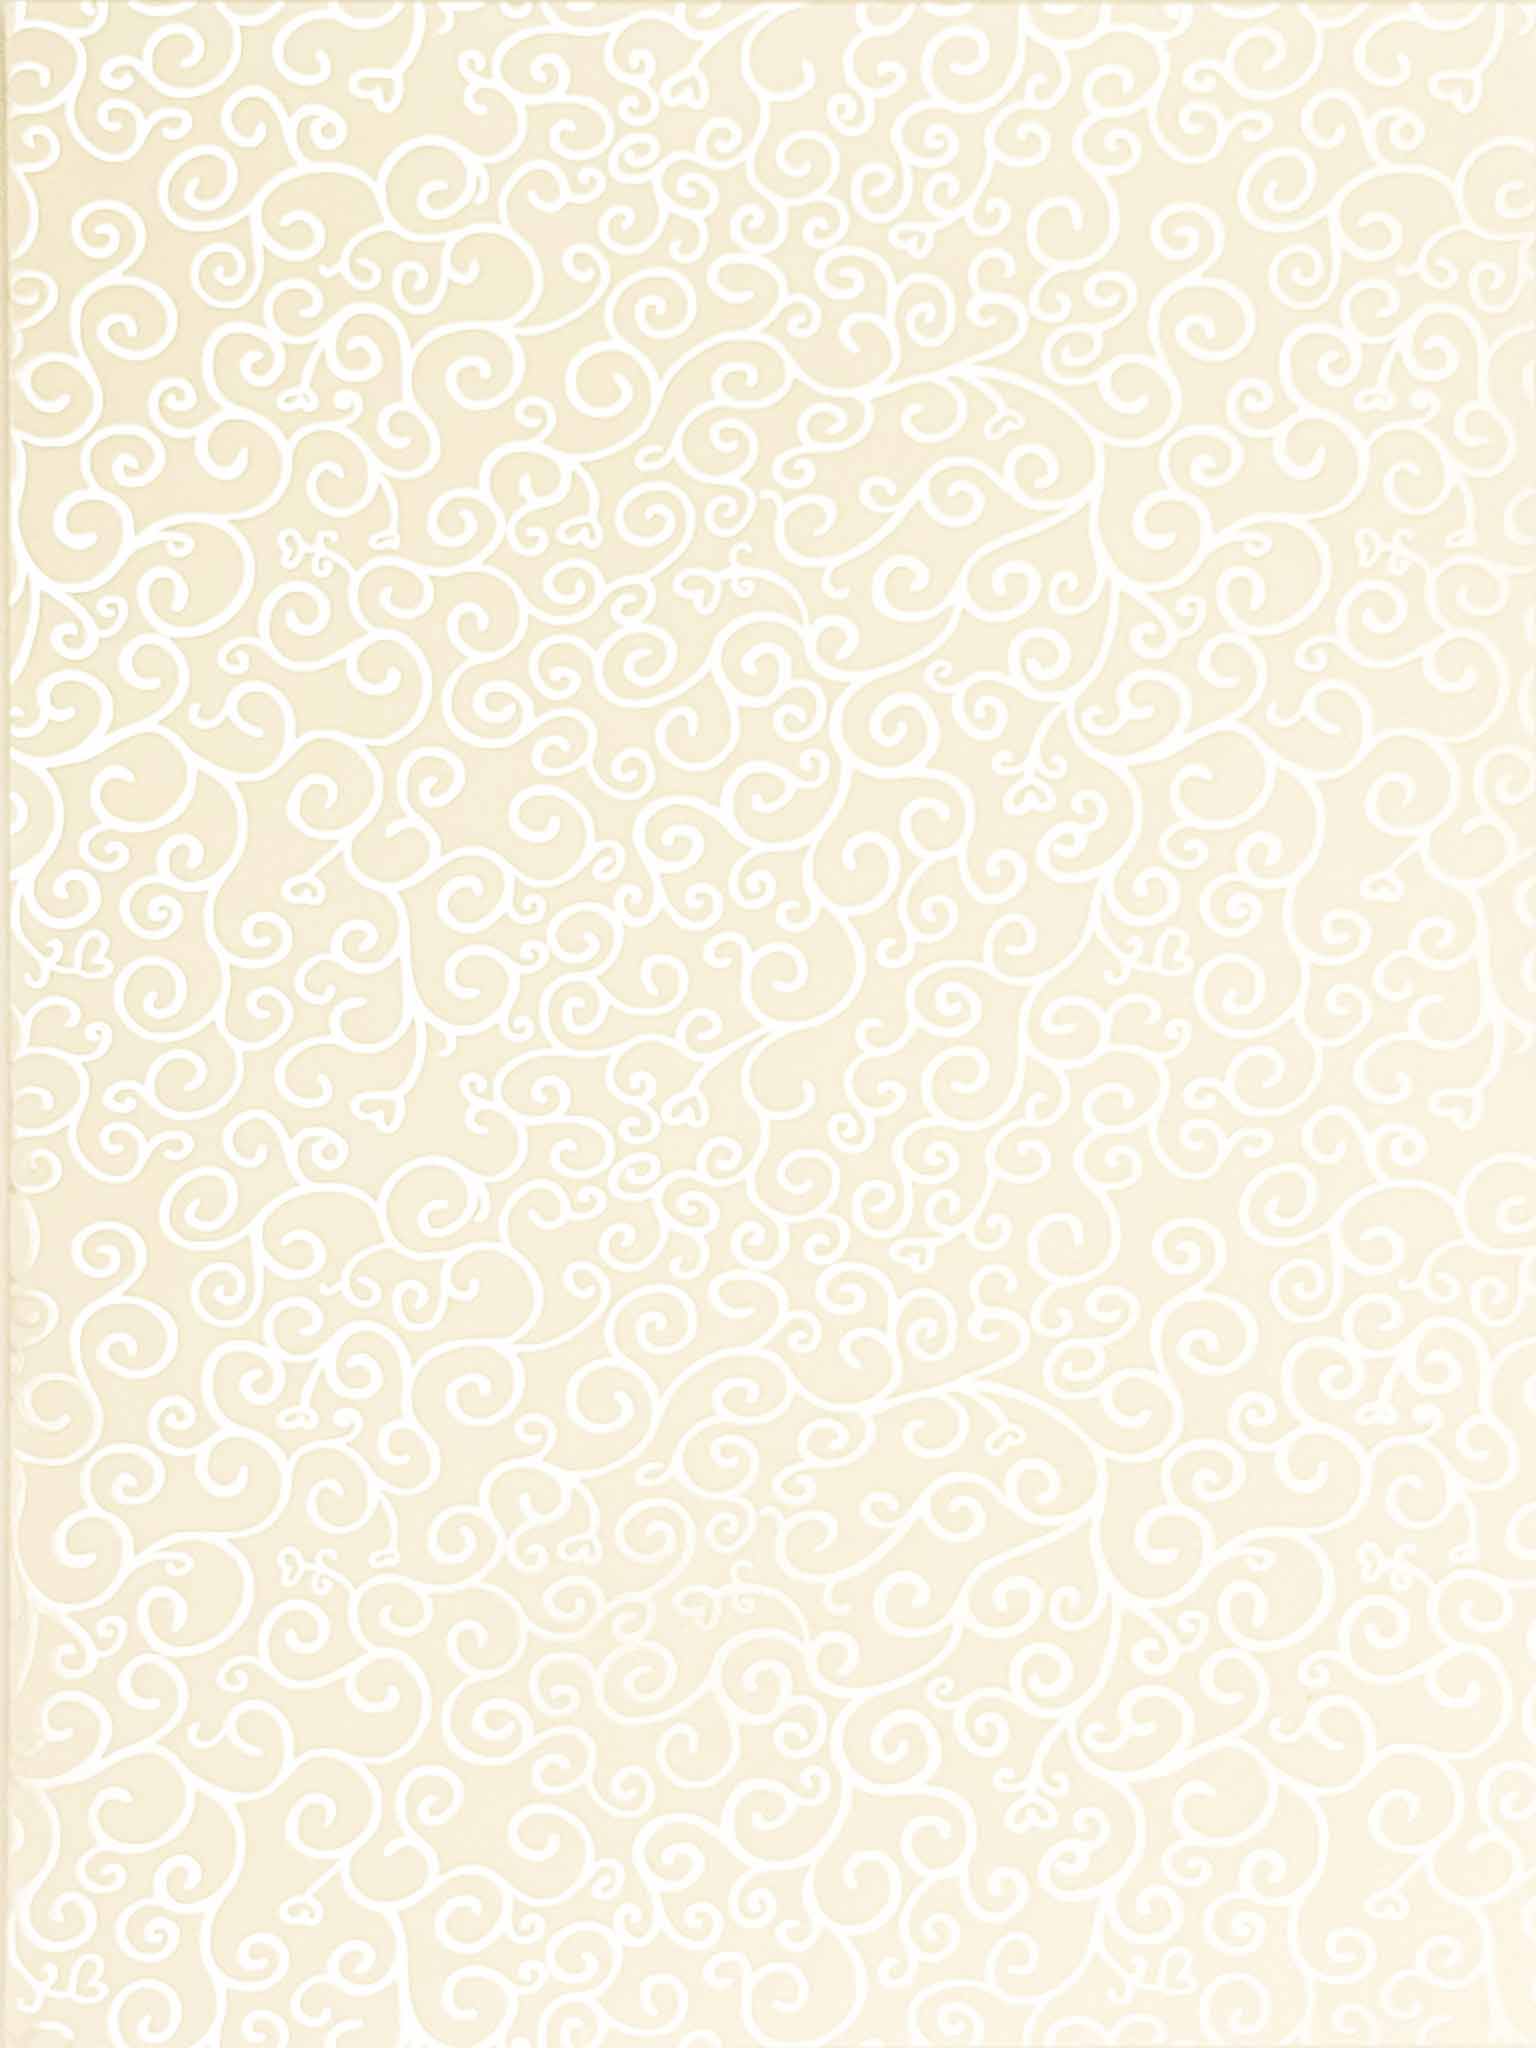 venus-ivory-scroll-pattern-paper-with-hearts